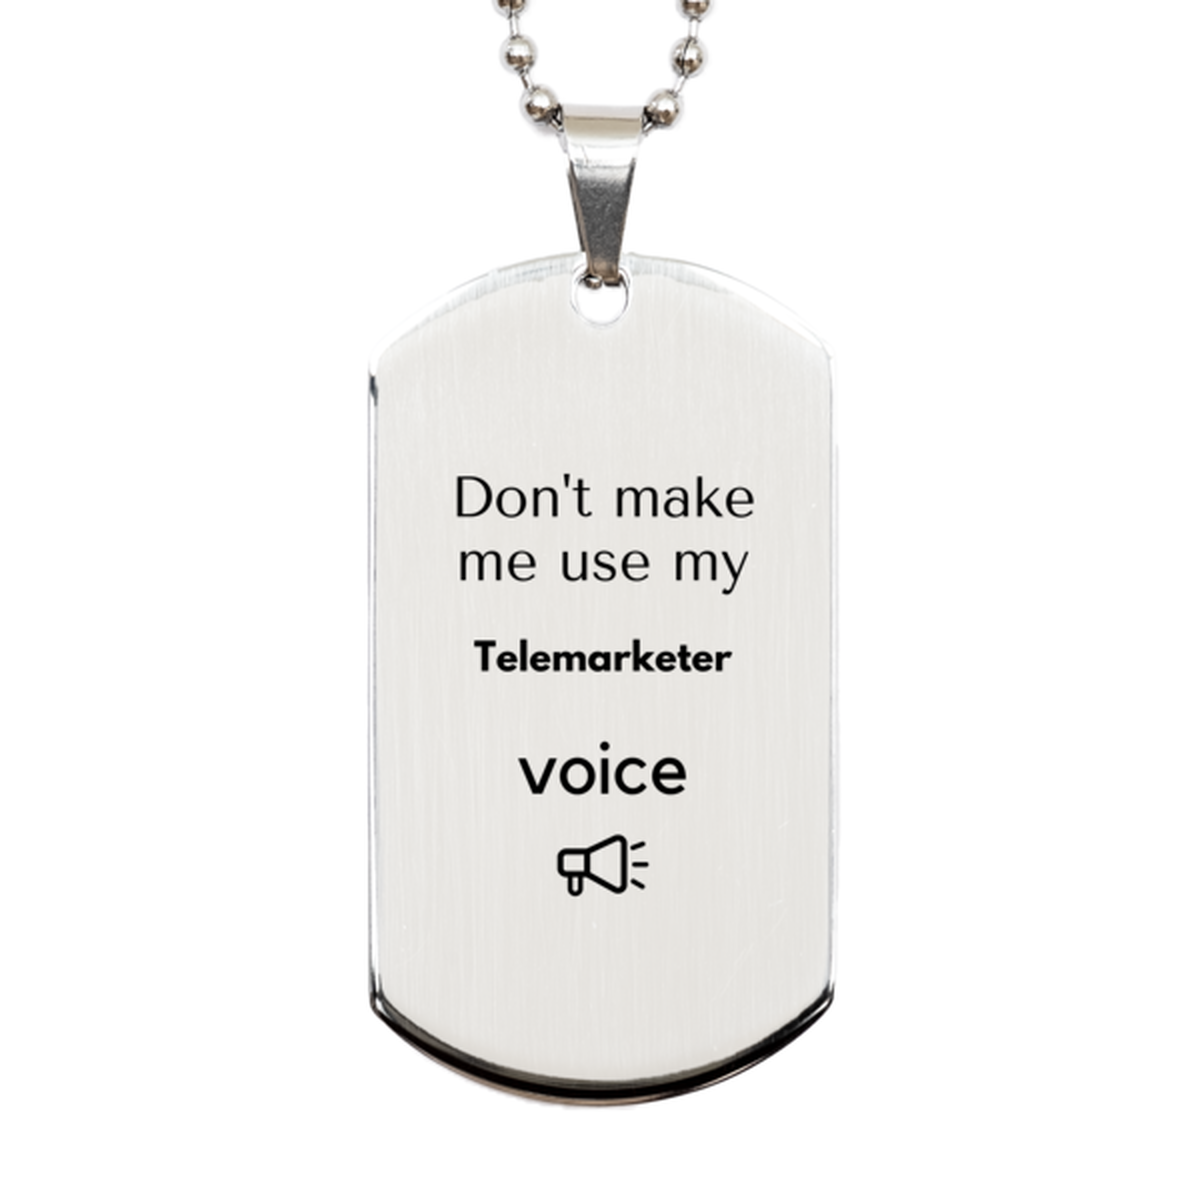 Don't make me use my Telemarketer voice, Sarcasm Telemarketer Gifts, Christmas Telemarketer Silver Dog Tag Birthday Unique Gifts For Telemarketer Coworkers, Men, Women, Colleague, Friends